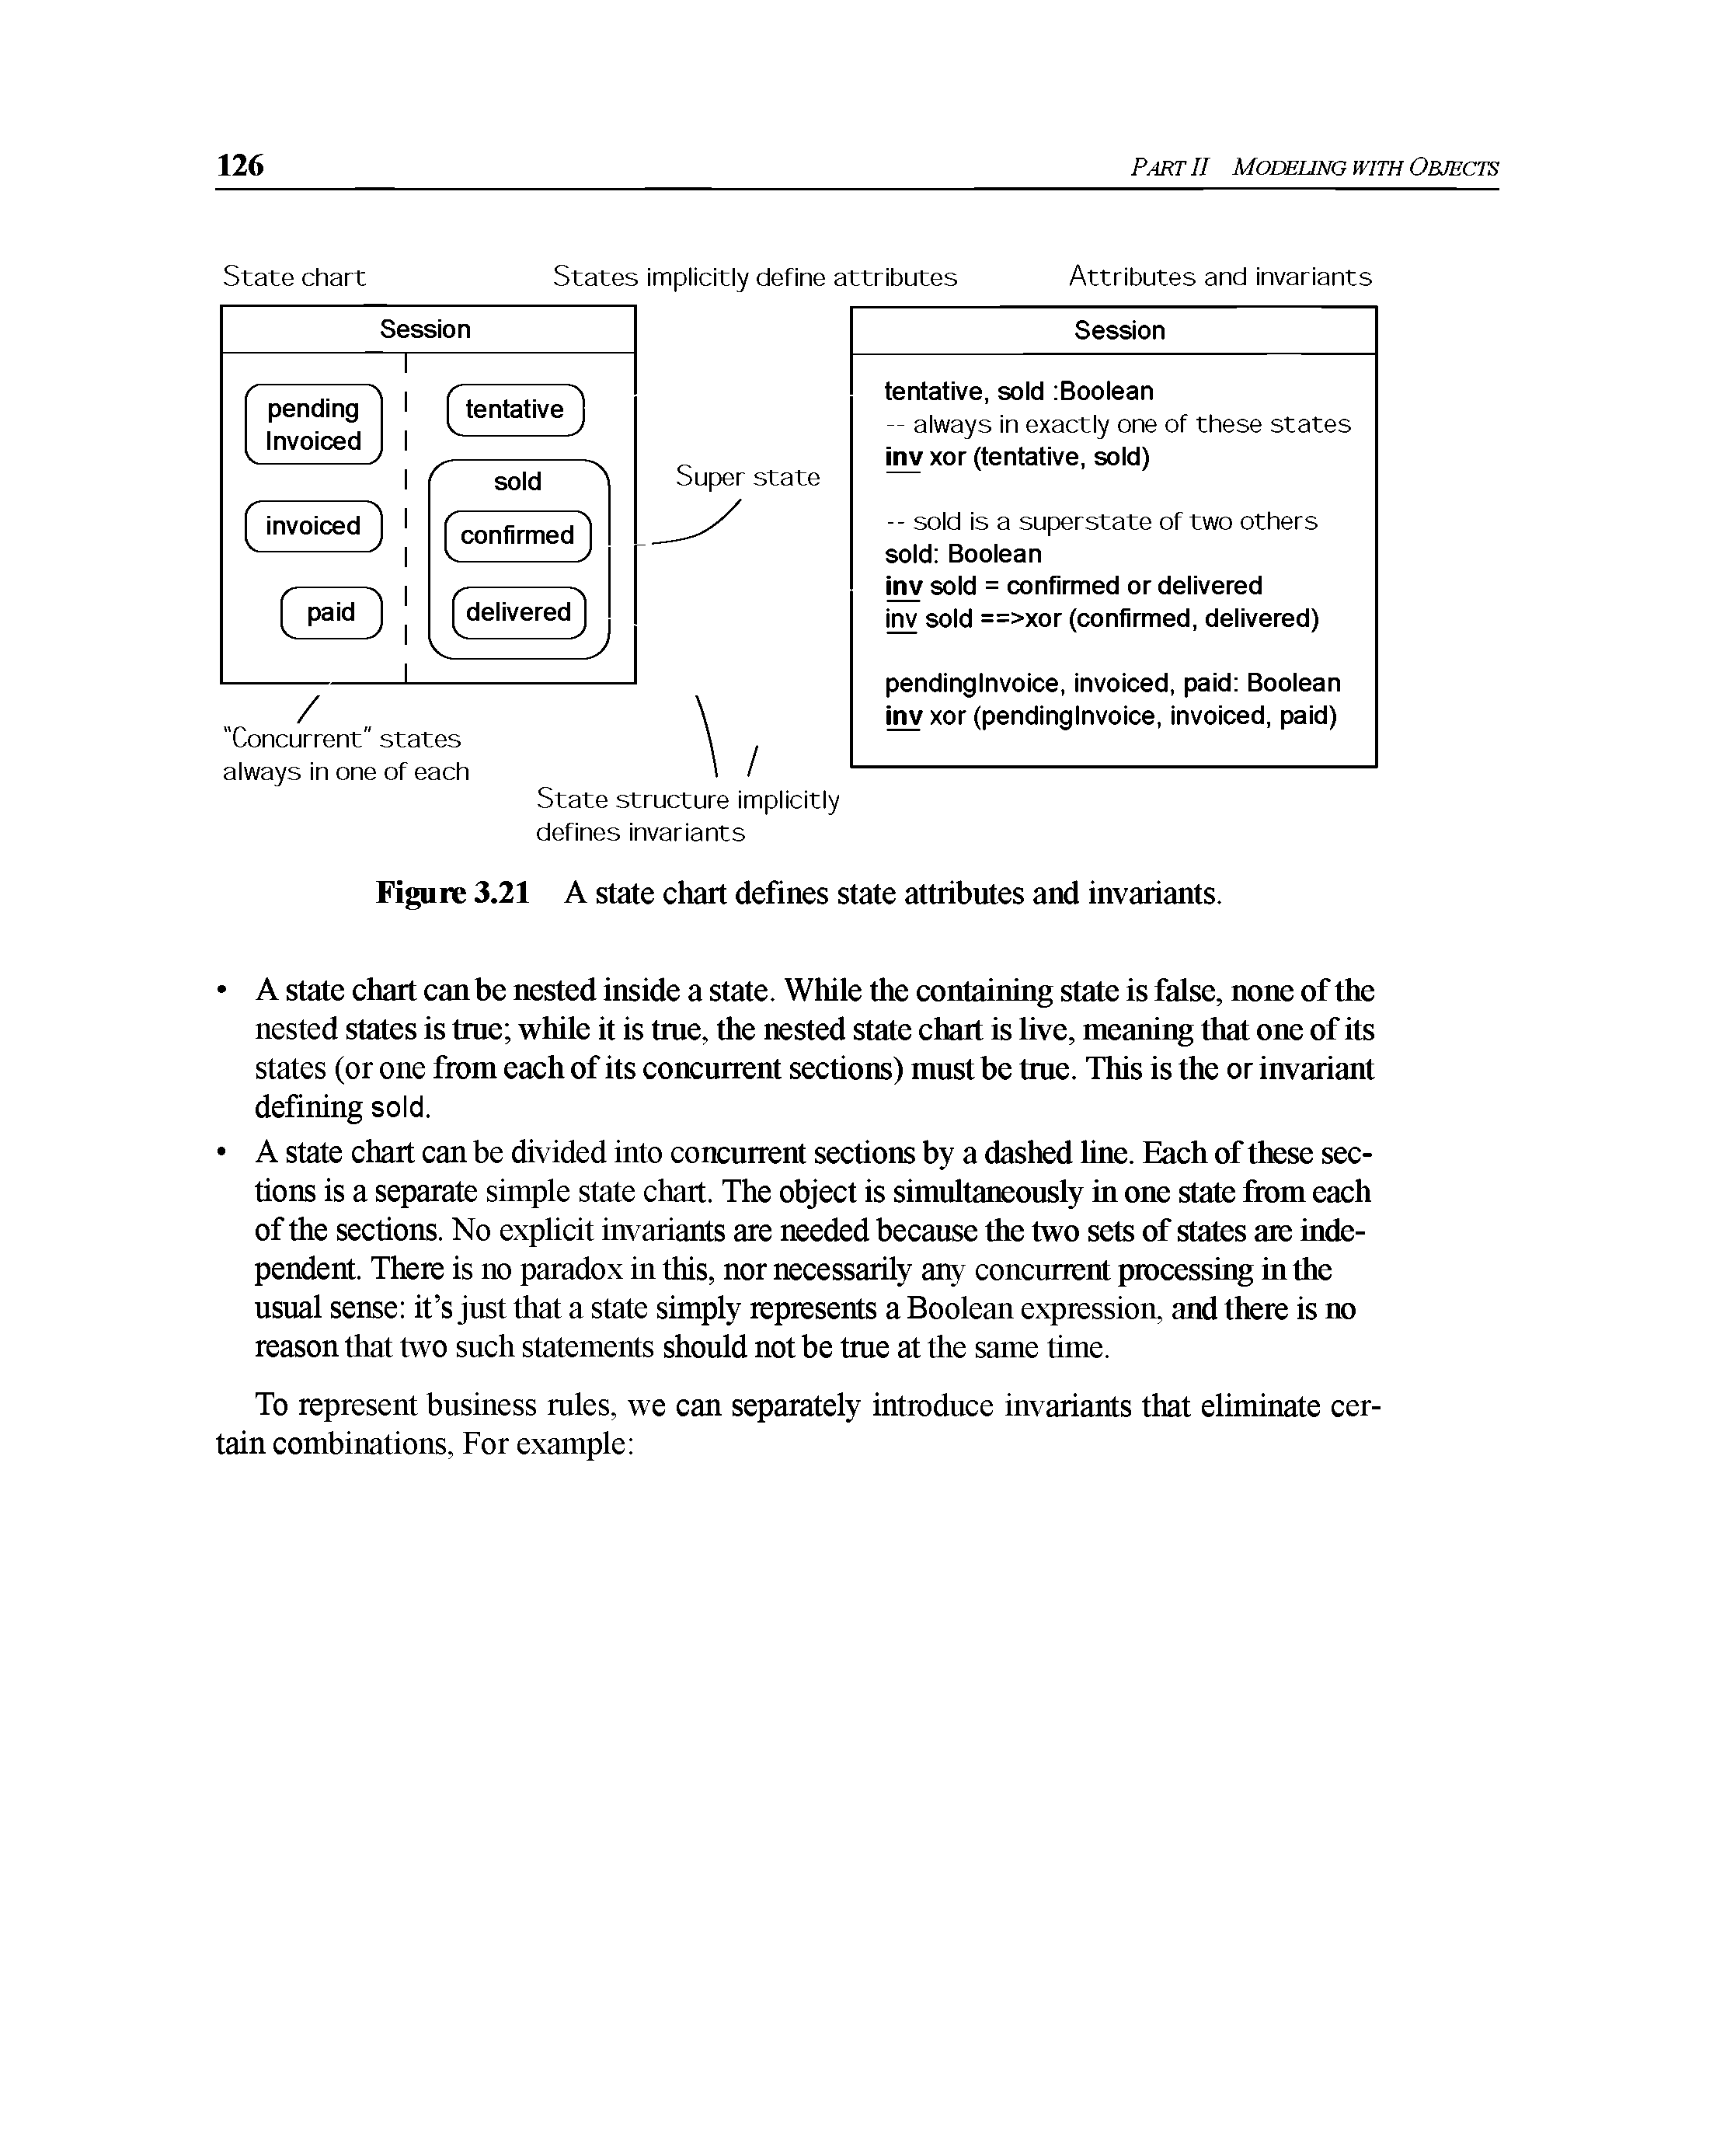 Figure 3.21 A state chart defines state attributes and invariants.